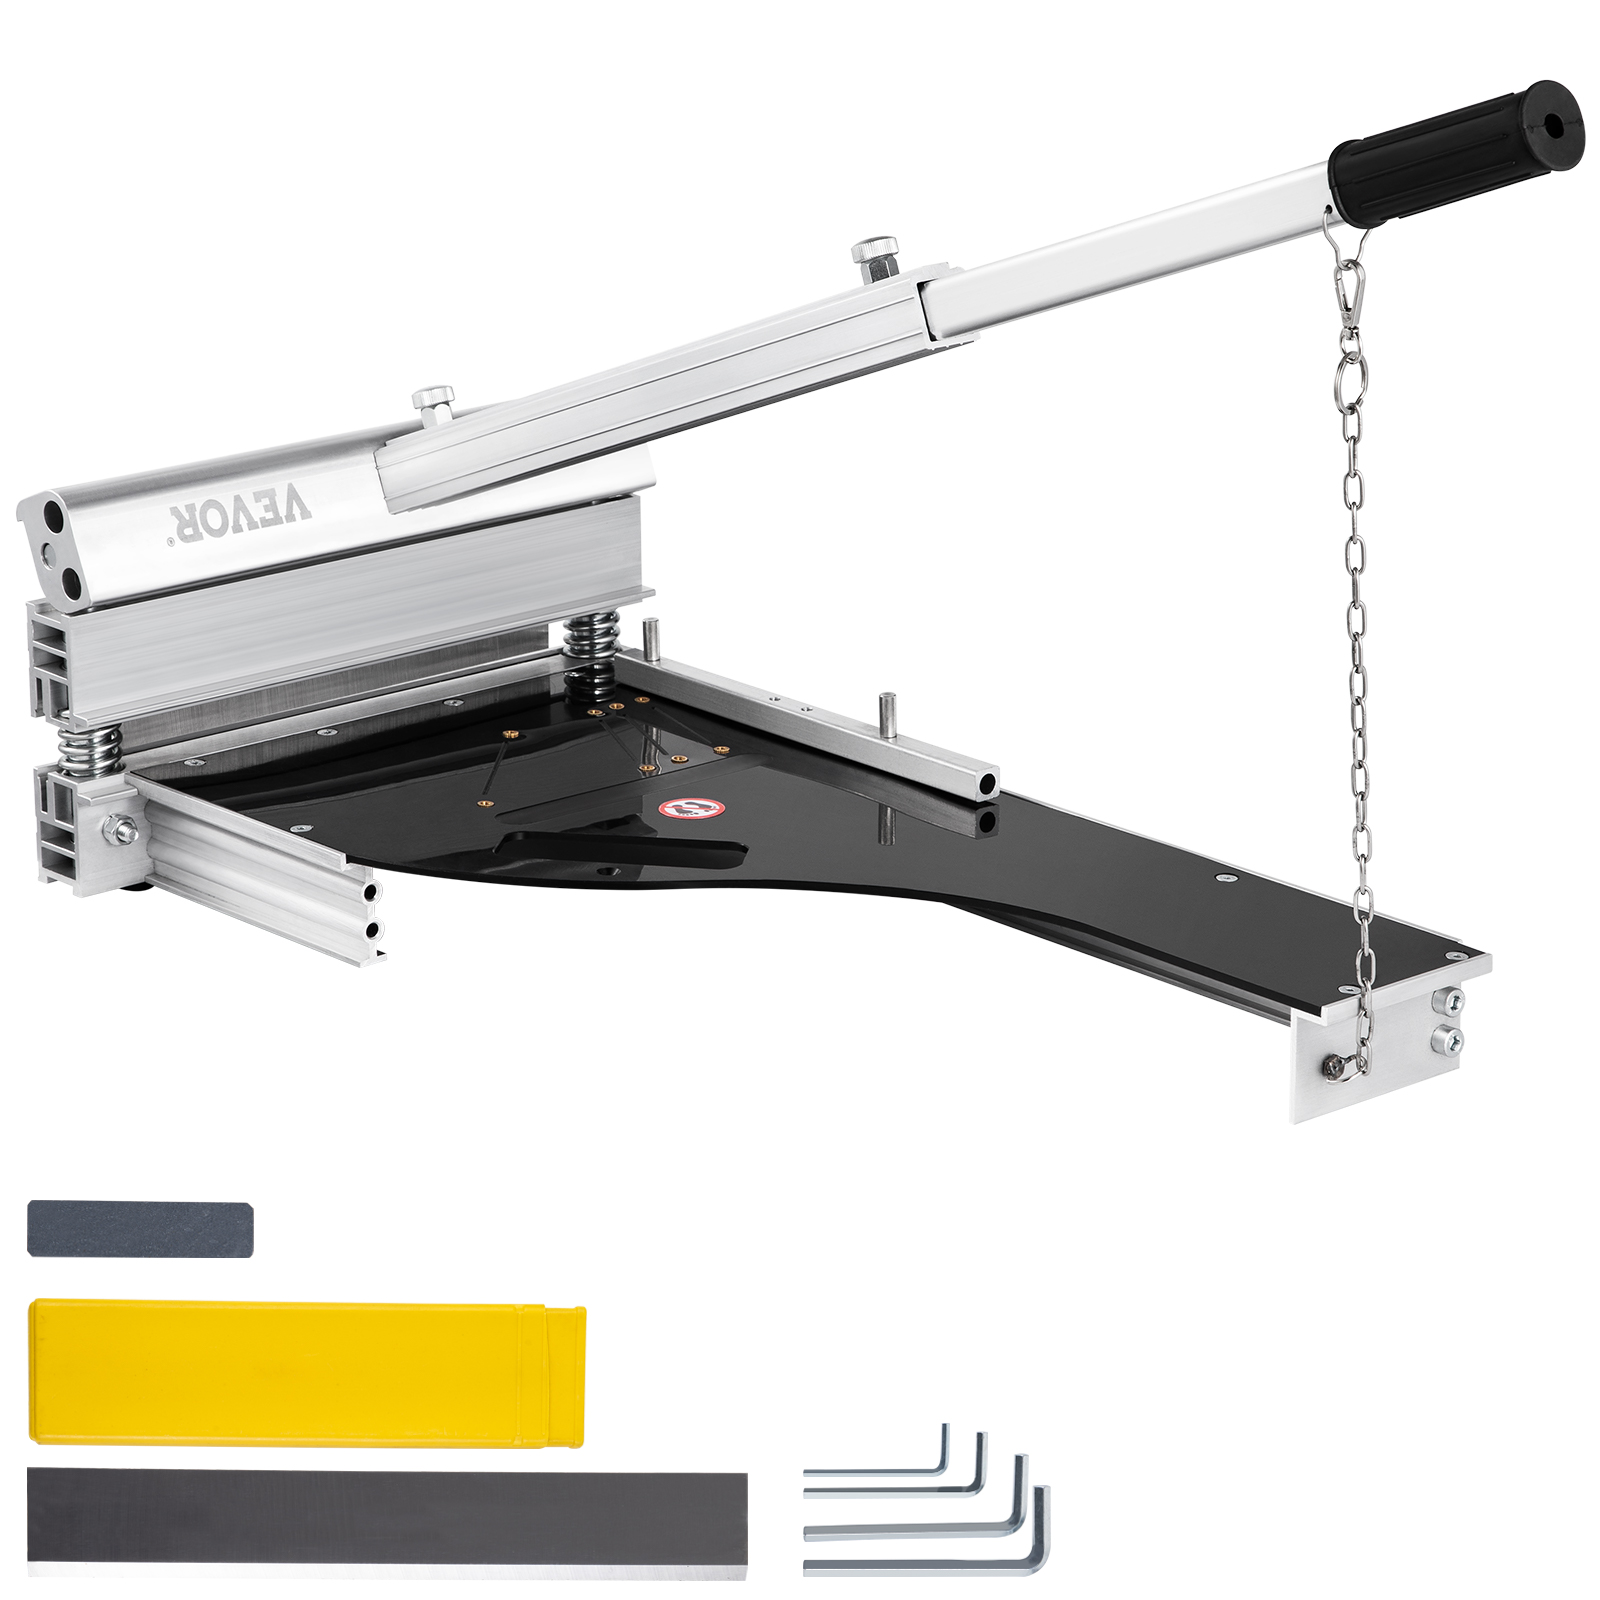 9 Rigid Core Vinyl Plank Cutter LVP-230 with Replacement bLade